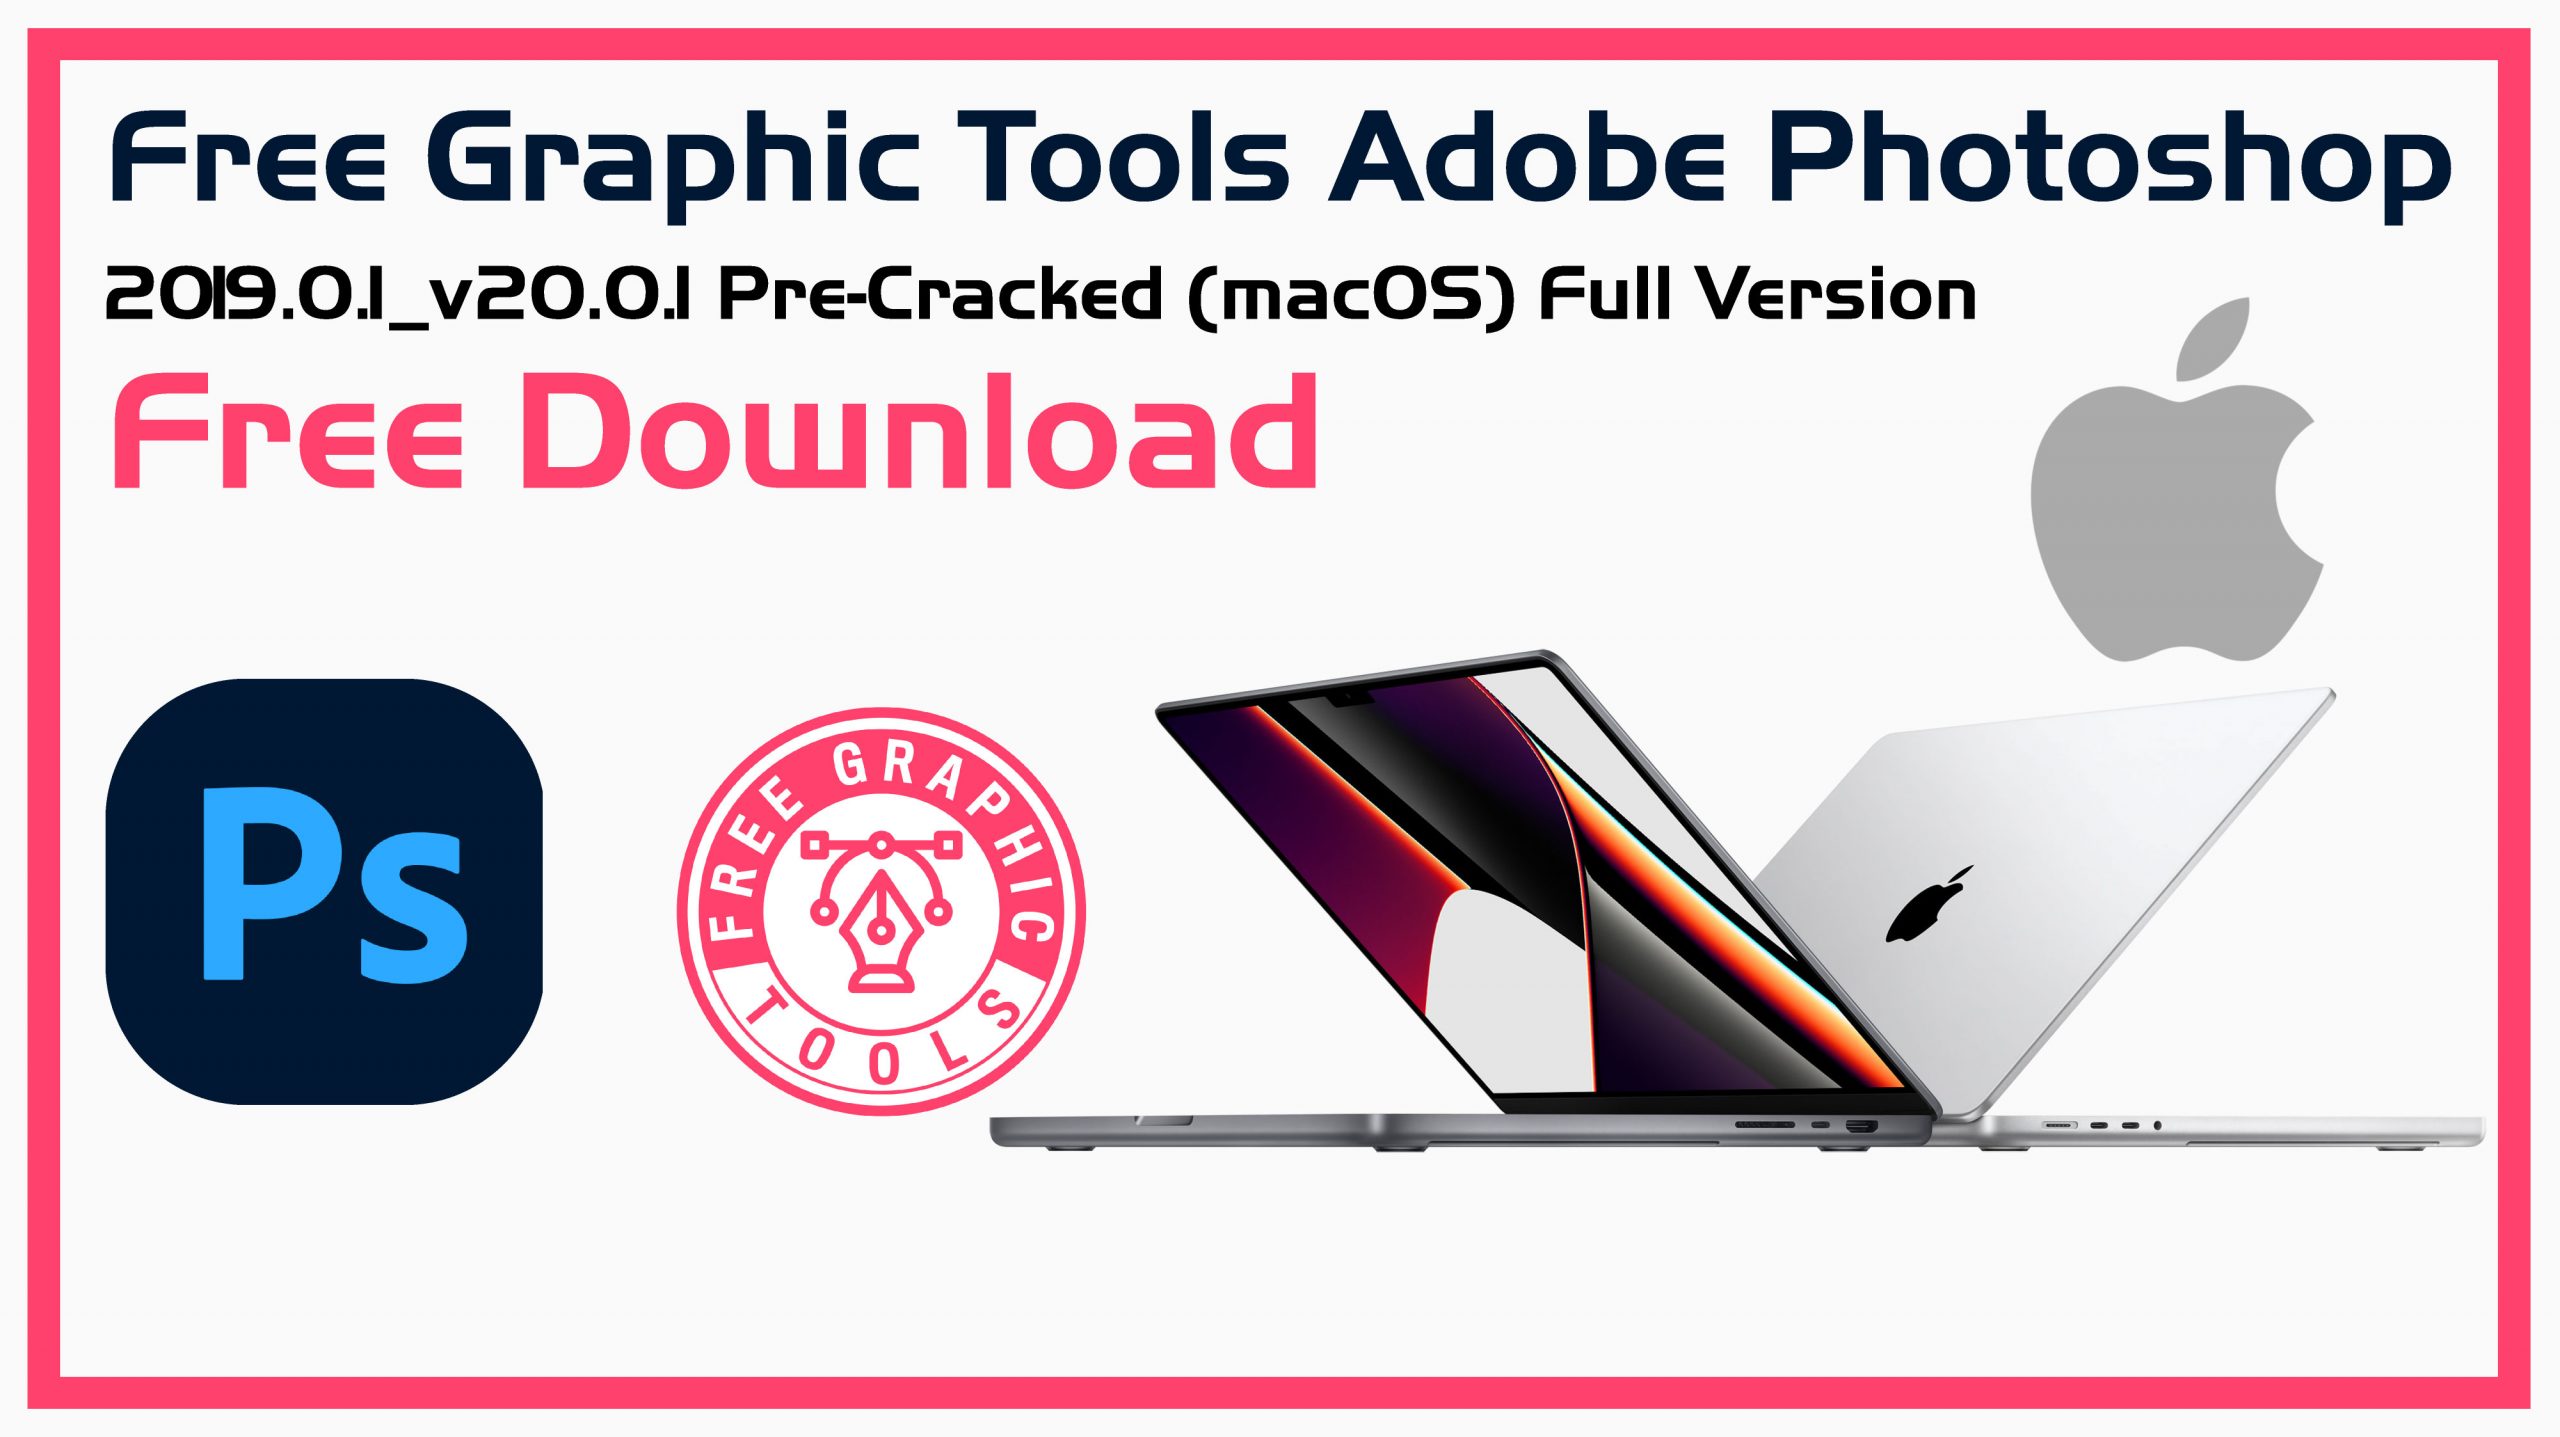 Free-Graphic-Tools-Adobe-Photoshop-2019.0.1_v20.0.1-Pre-Cracked-(macOS)-Full-Version-Free-Download